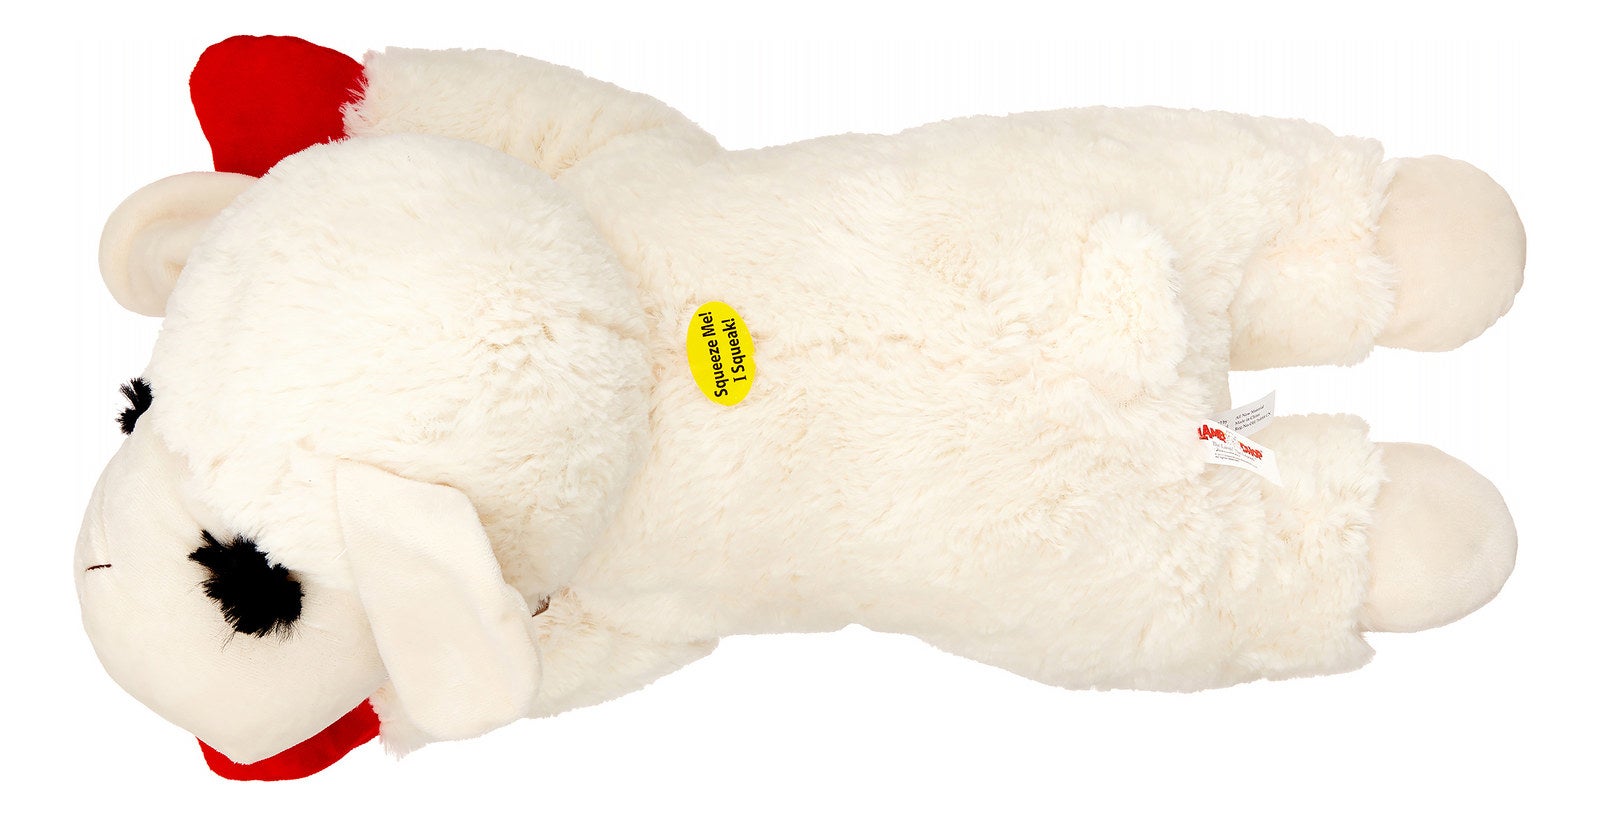 Plush lamb toy lying on its side with a red bow, for sale